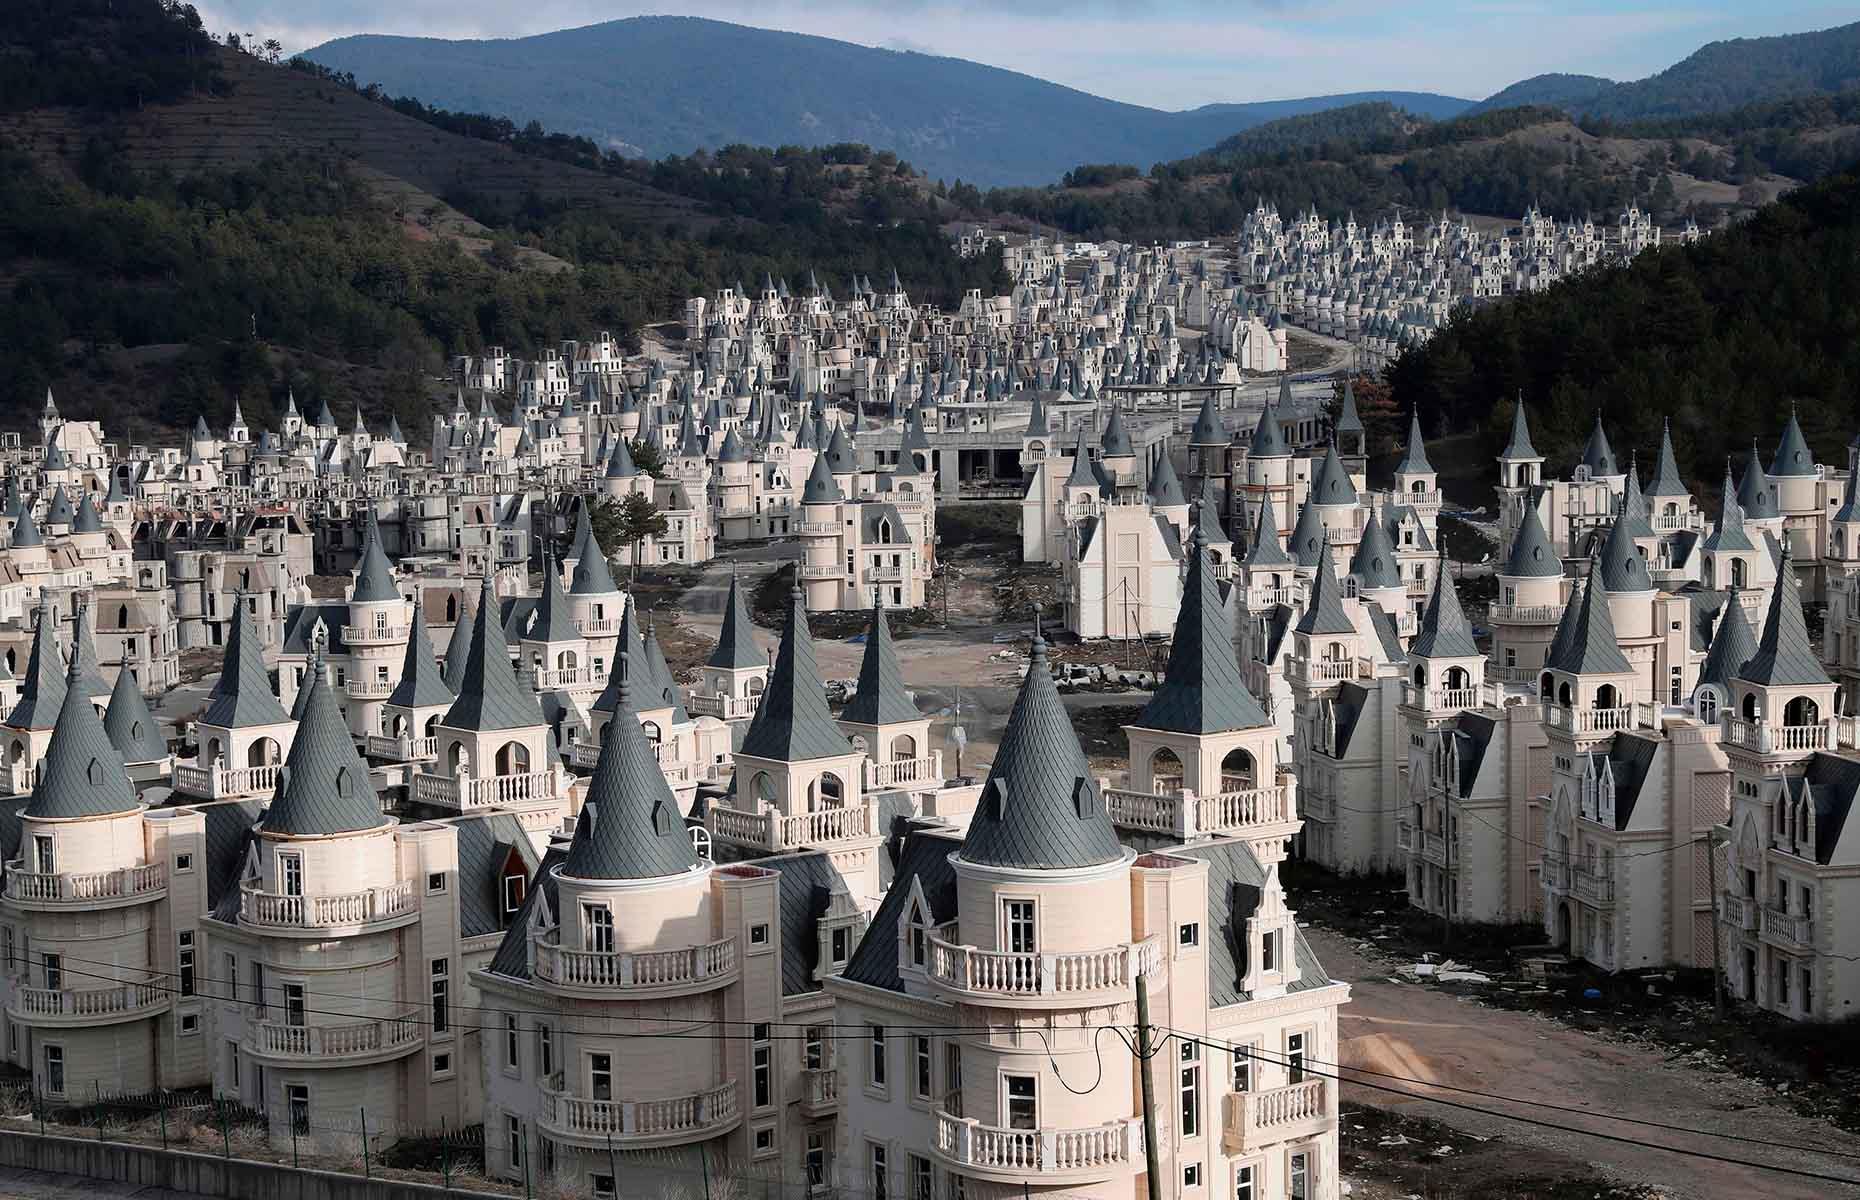 <p>Nestled in a rural mountainous spot, halfway between Istanbul and Ankara, this modern abandoned ghost town is a surreal sight to behold. Hundreds of mini châteaux, in various stages of completion, stand in a deathly silent valley after funding for the project dried up.</p>